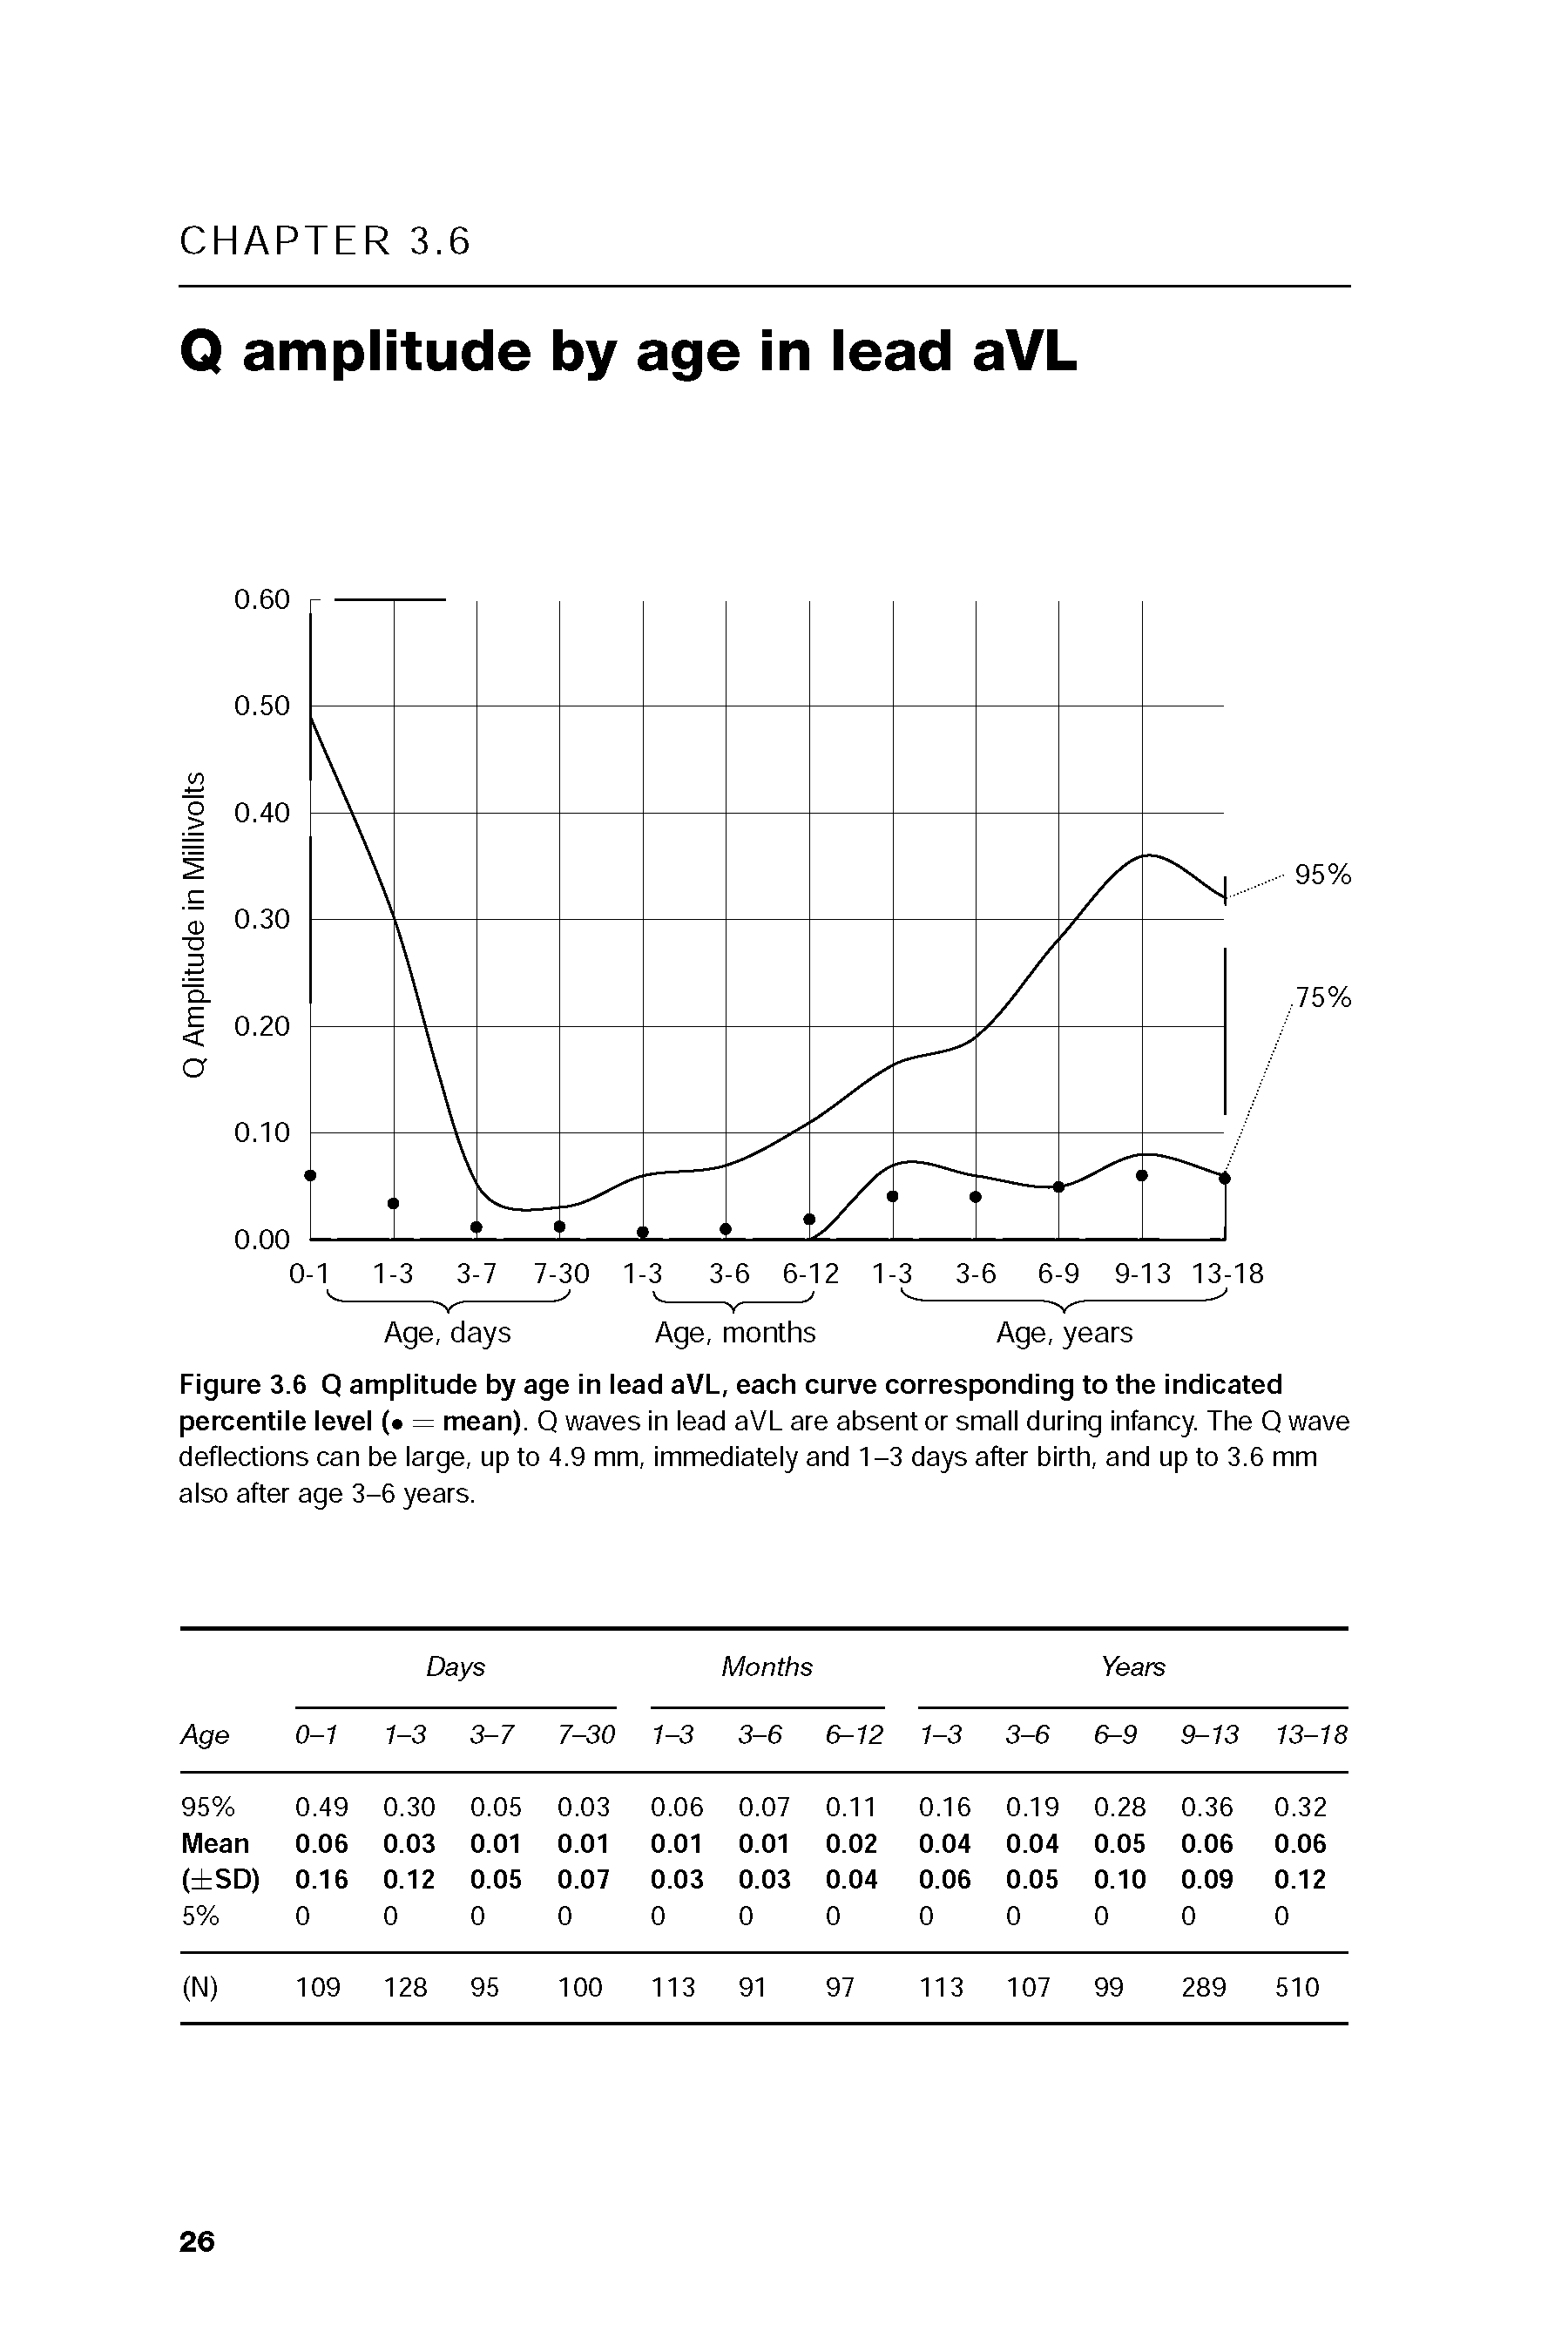 Figure 3.6 Q amplitude by age in lead aVL, each curve corresponding to the indicated percentile level ( = mean). Q waves in lead aVL are absent or small during Infancy. The Q wave deflections can be large, up to 4.9 mm. Immediately and 1-3 days after birth, and up to 3.6 mm also after age 3-6 years.